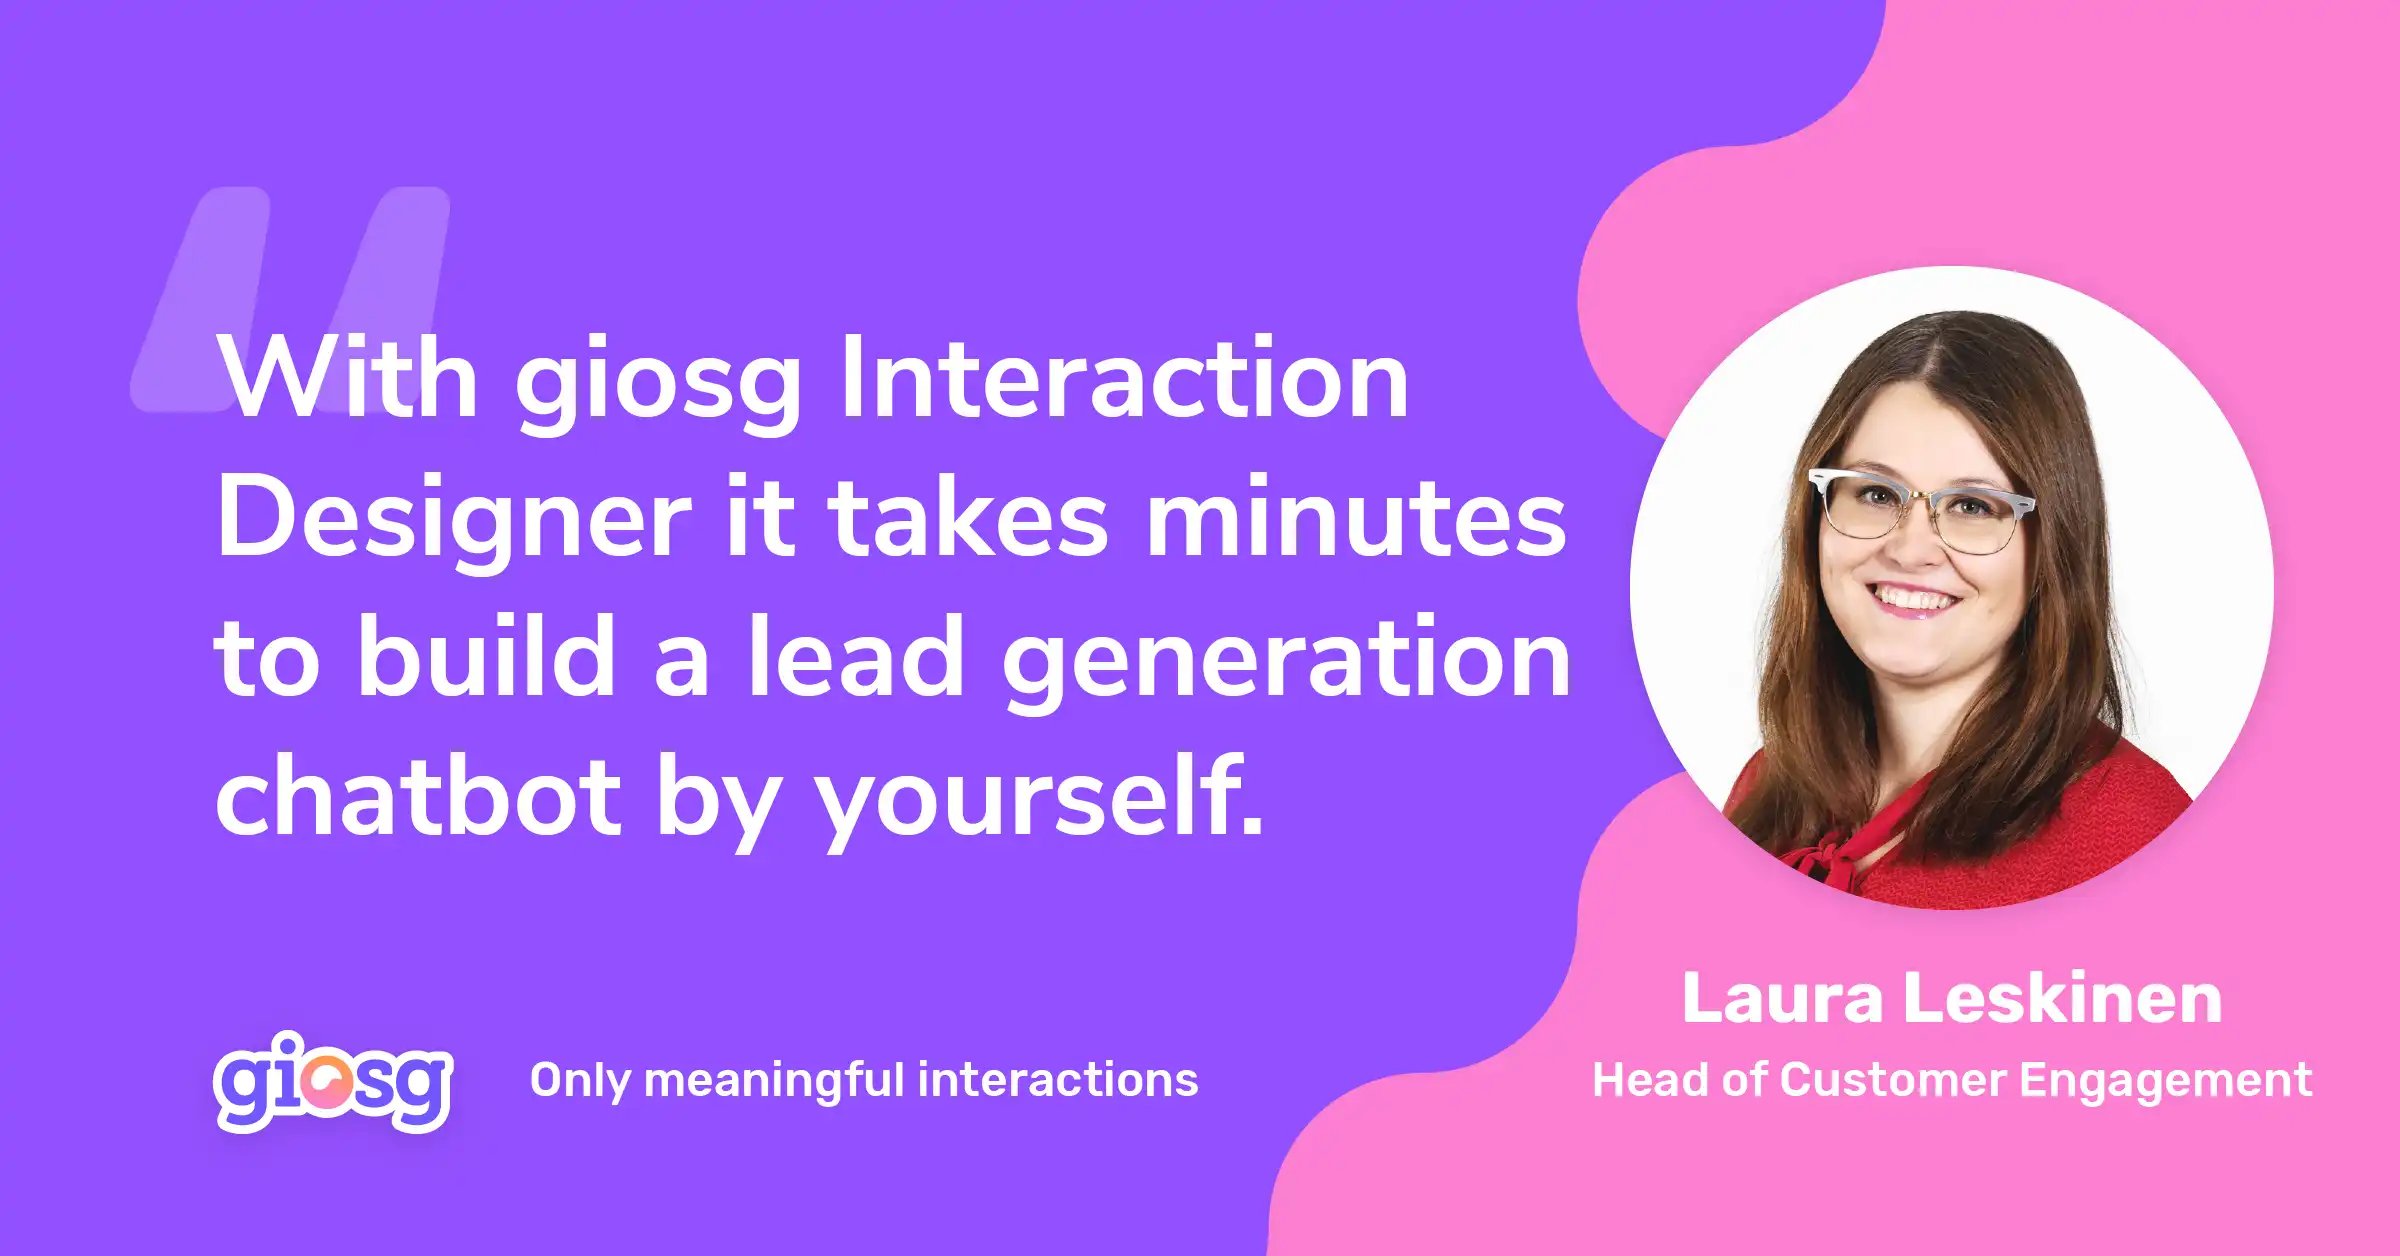 Quote by giosg's Laura Leskinen on giosg Interaction Designer